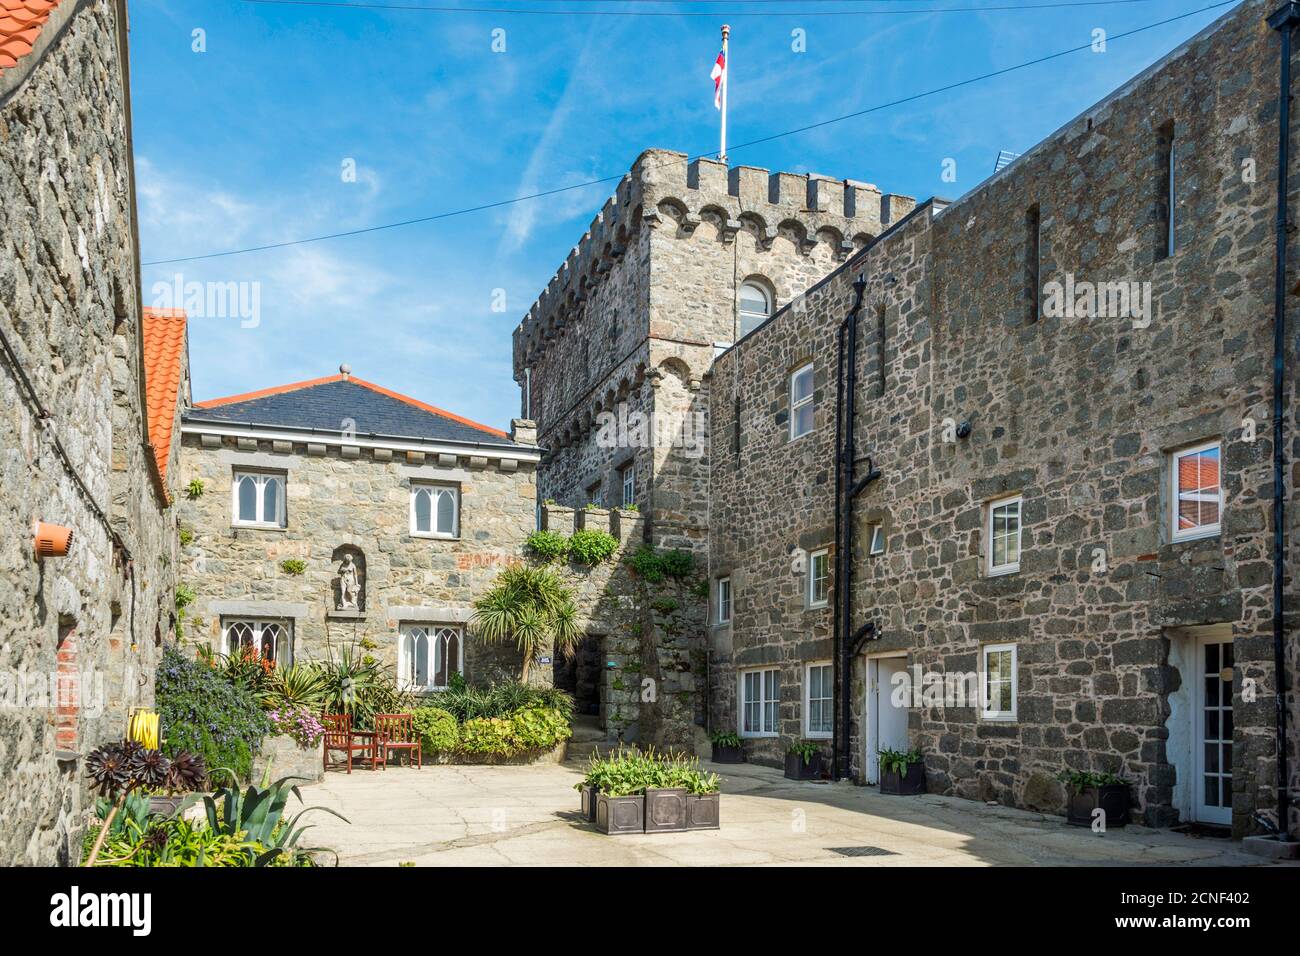 The Manor, on the Channel Island of Herm, part of the Bailiwick of Guernsey, UK.  The fortified keep has been converted into apartments. Stock Photo